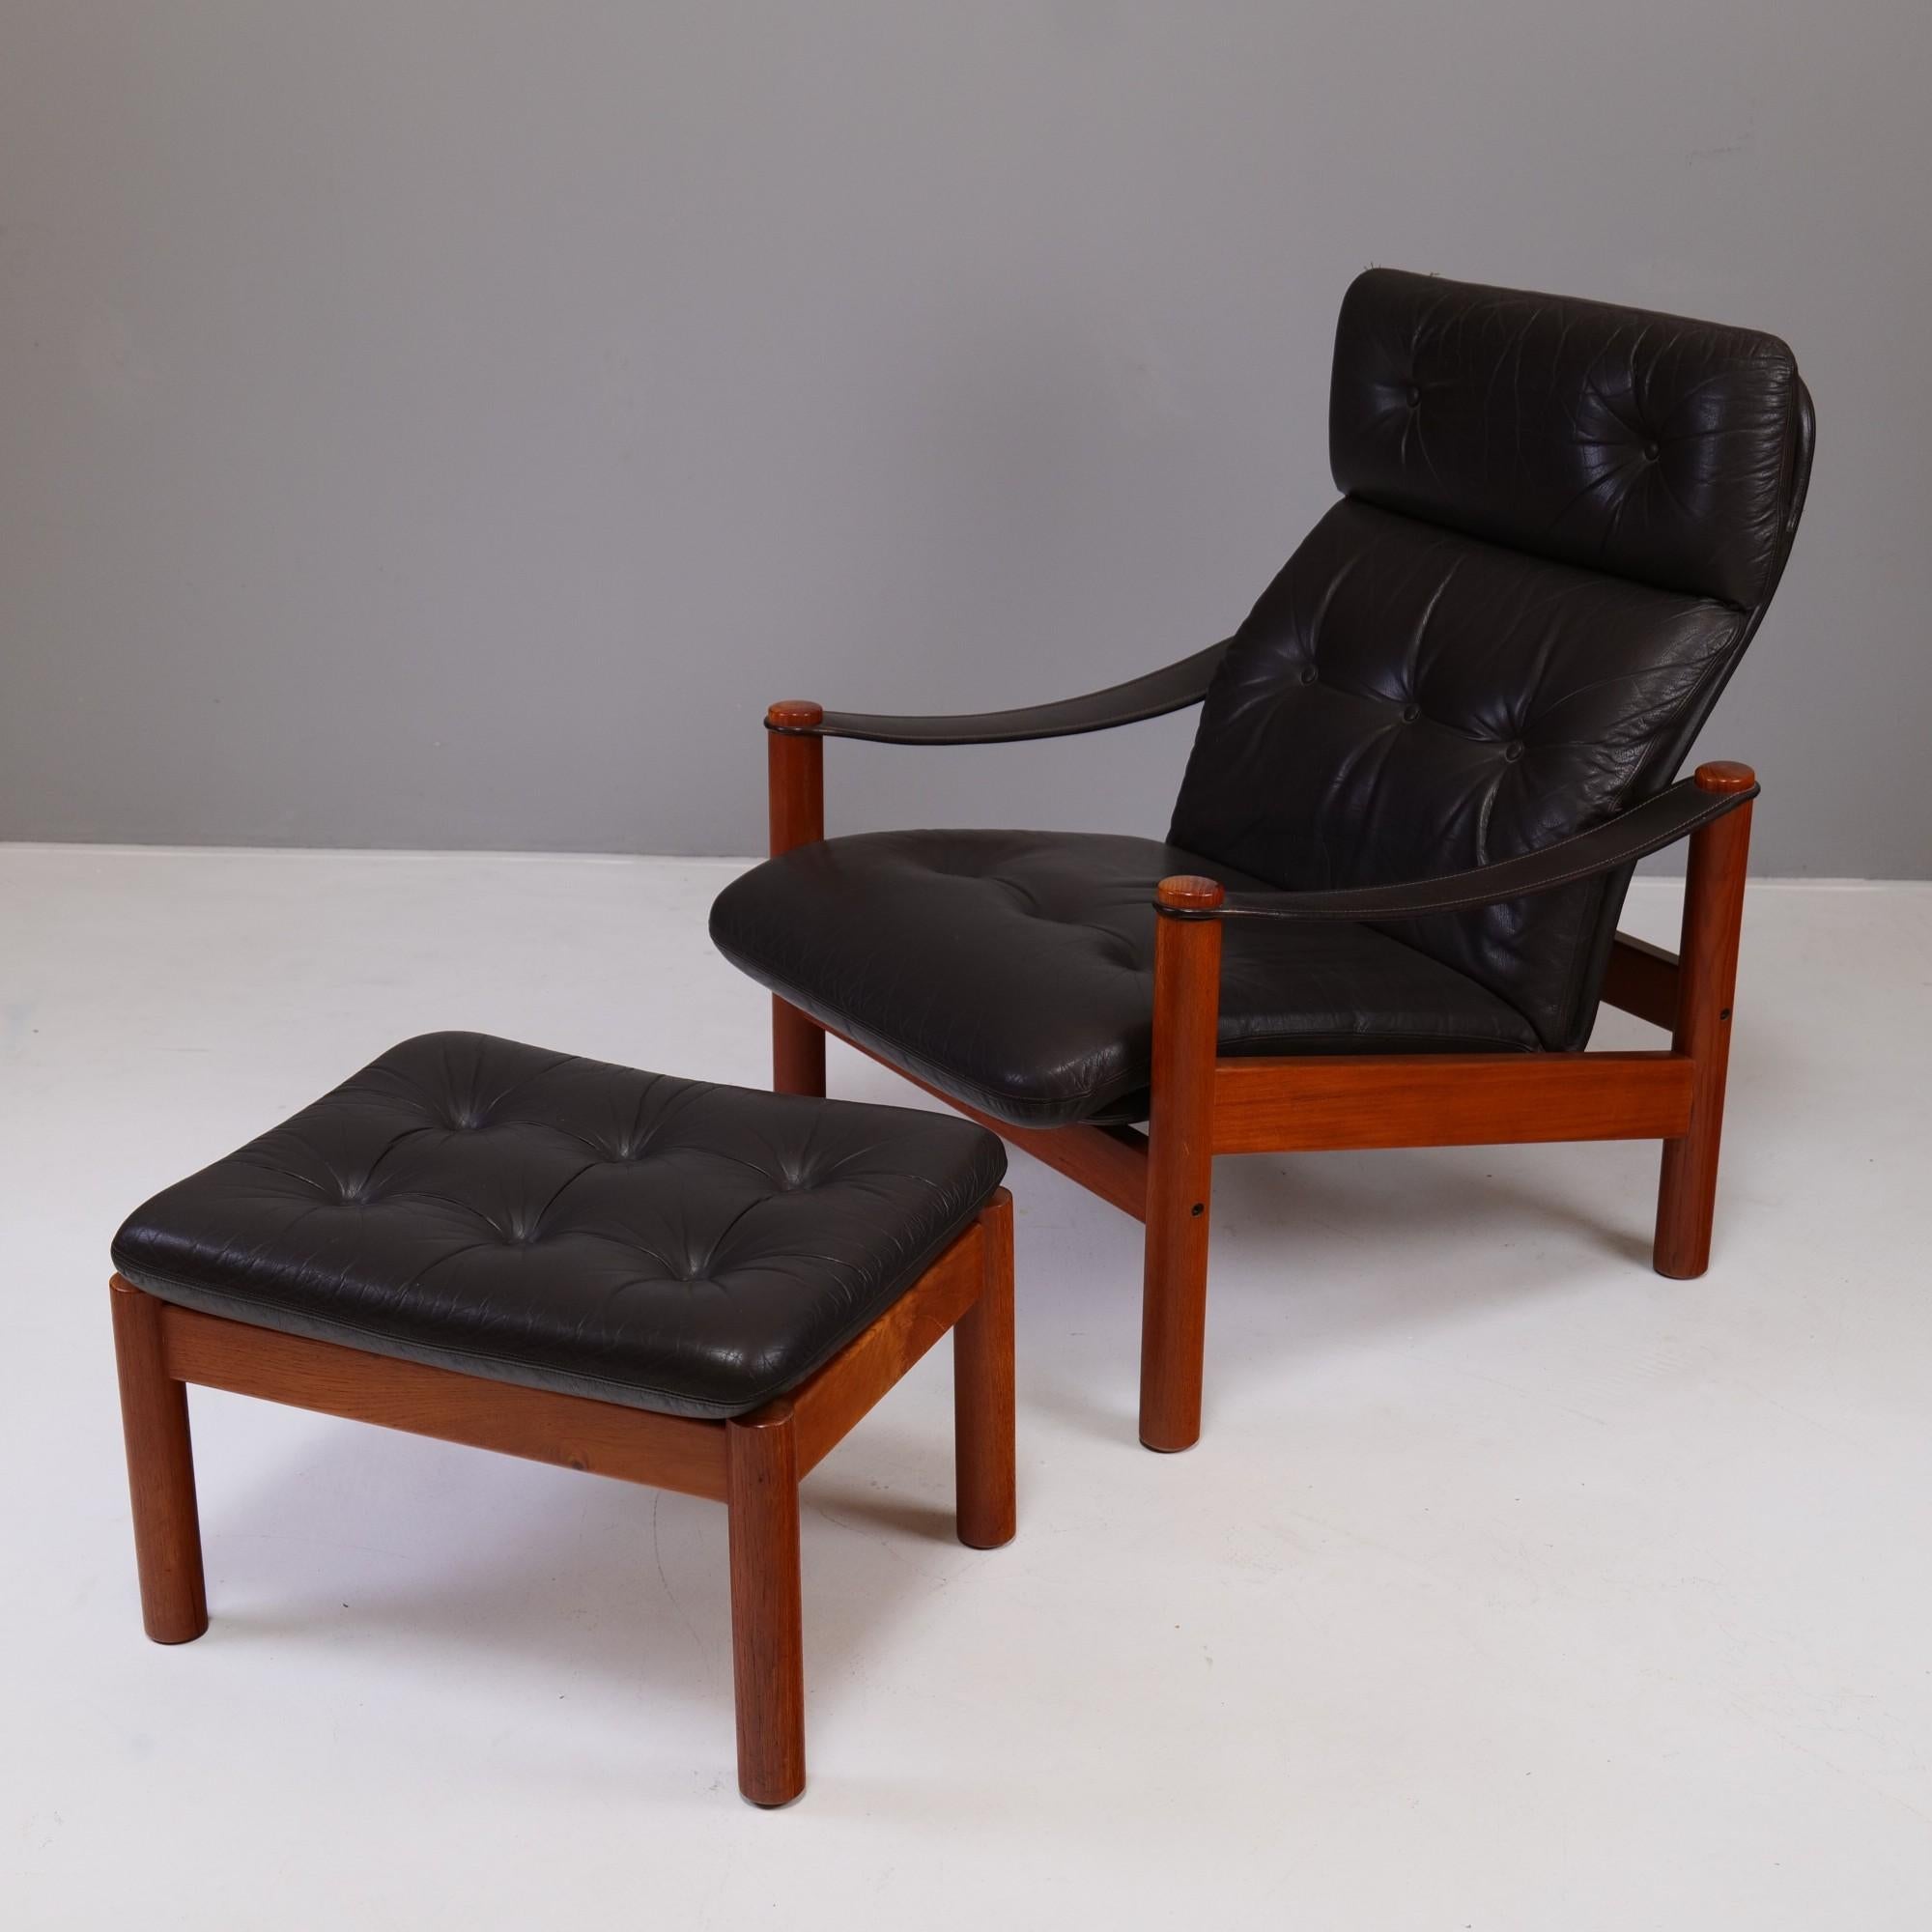 Original Danish leather lounge chair with ottomann.
 